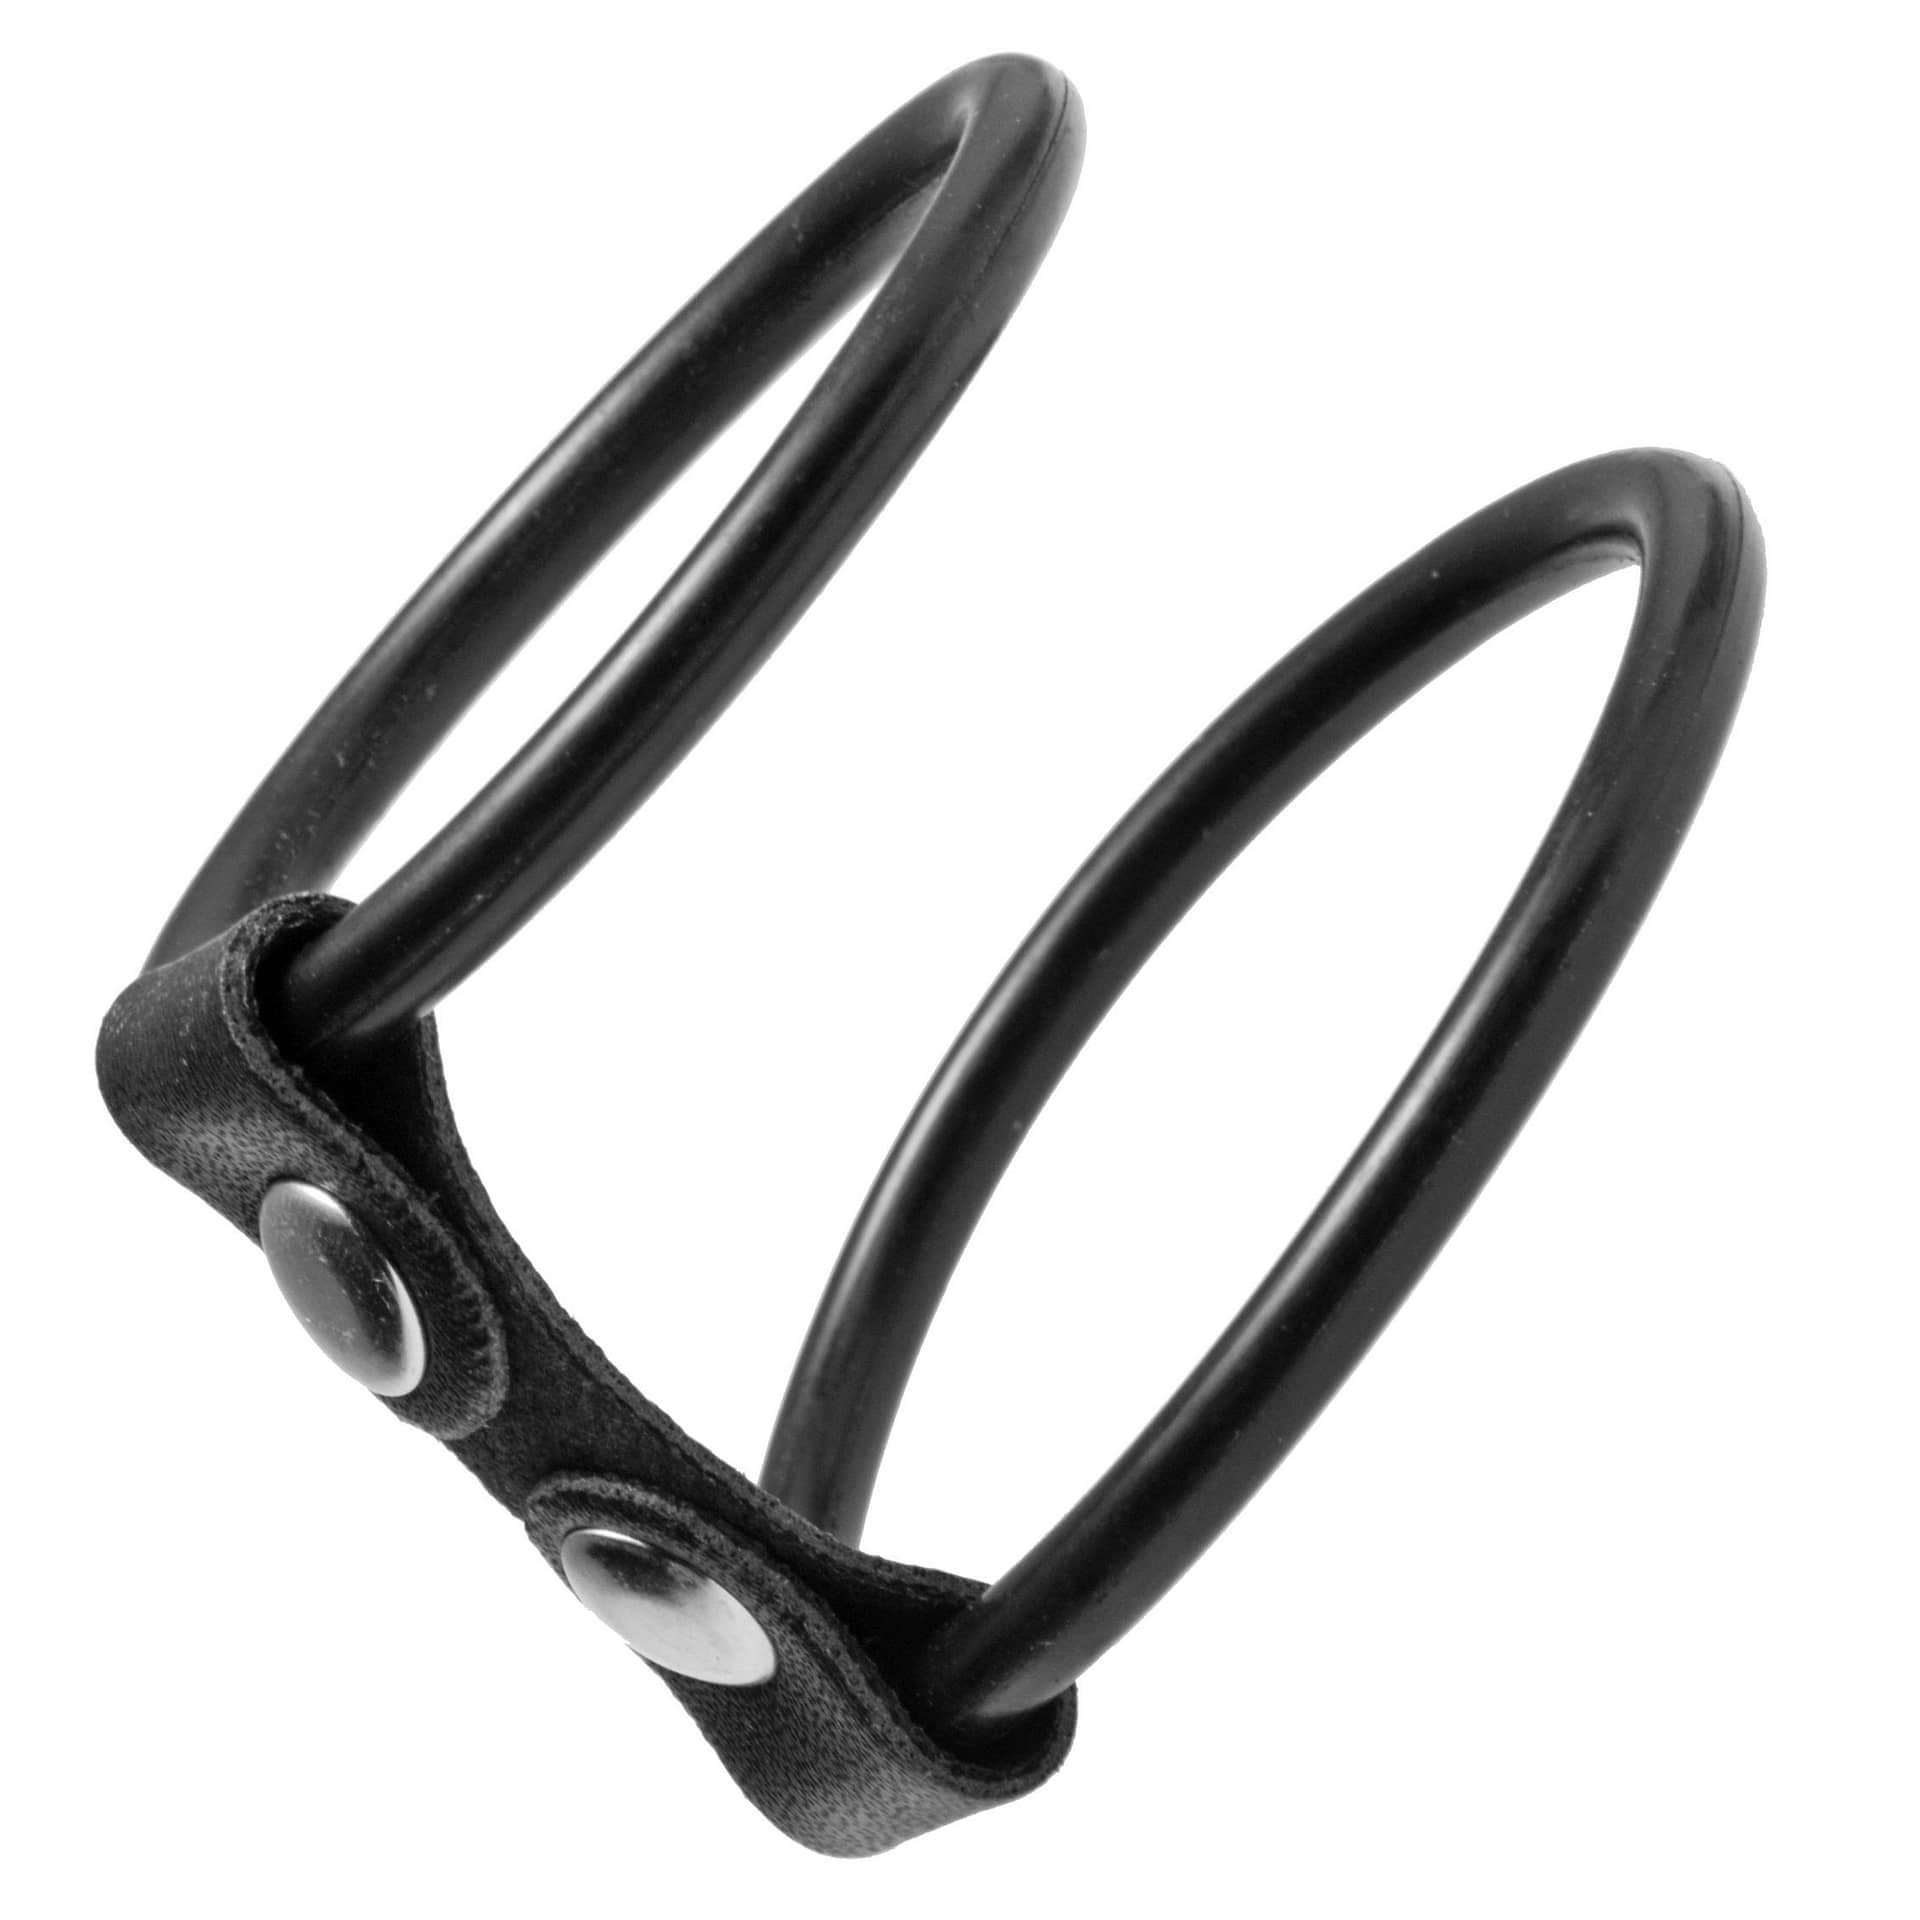 Double Cock Ring Harness The Bdsm Toy Shop